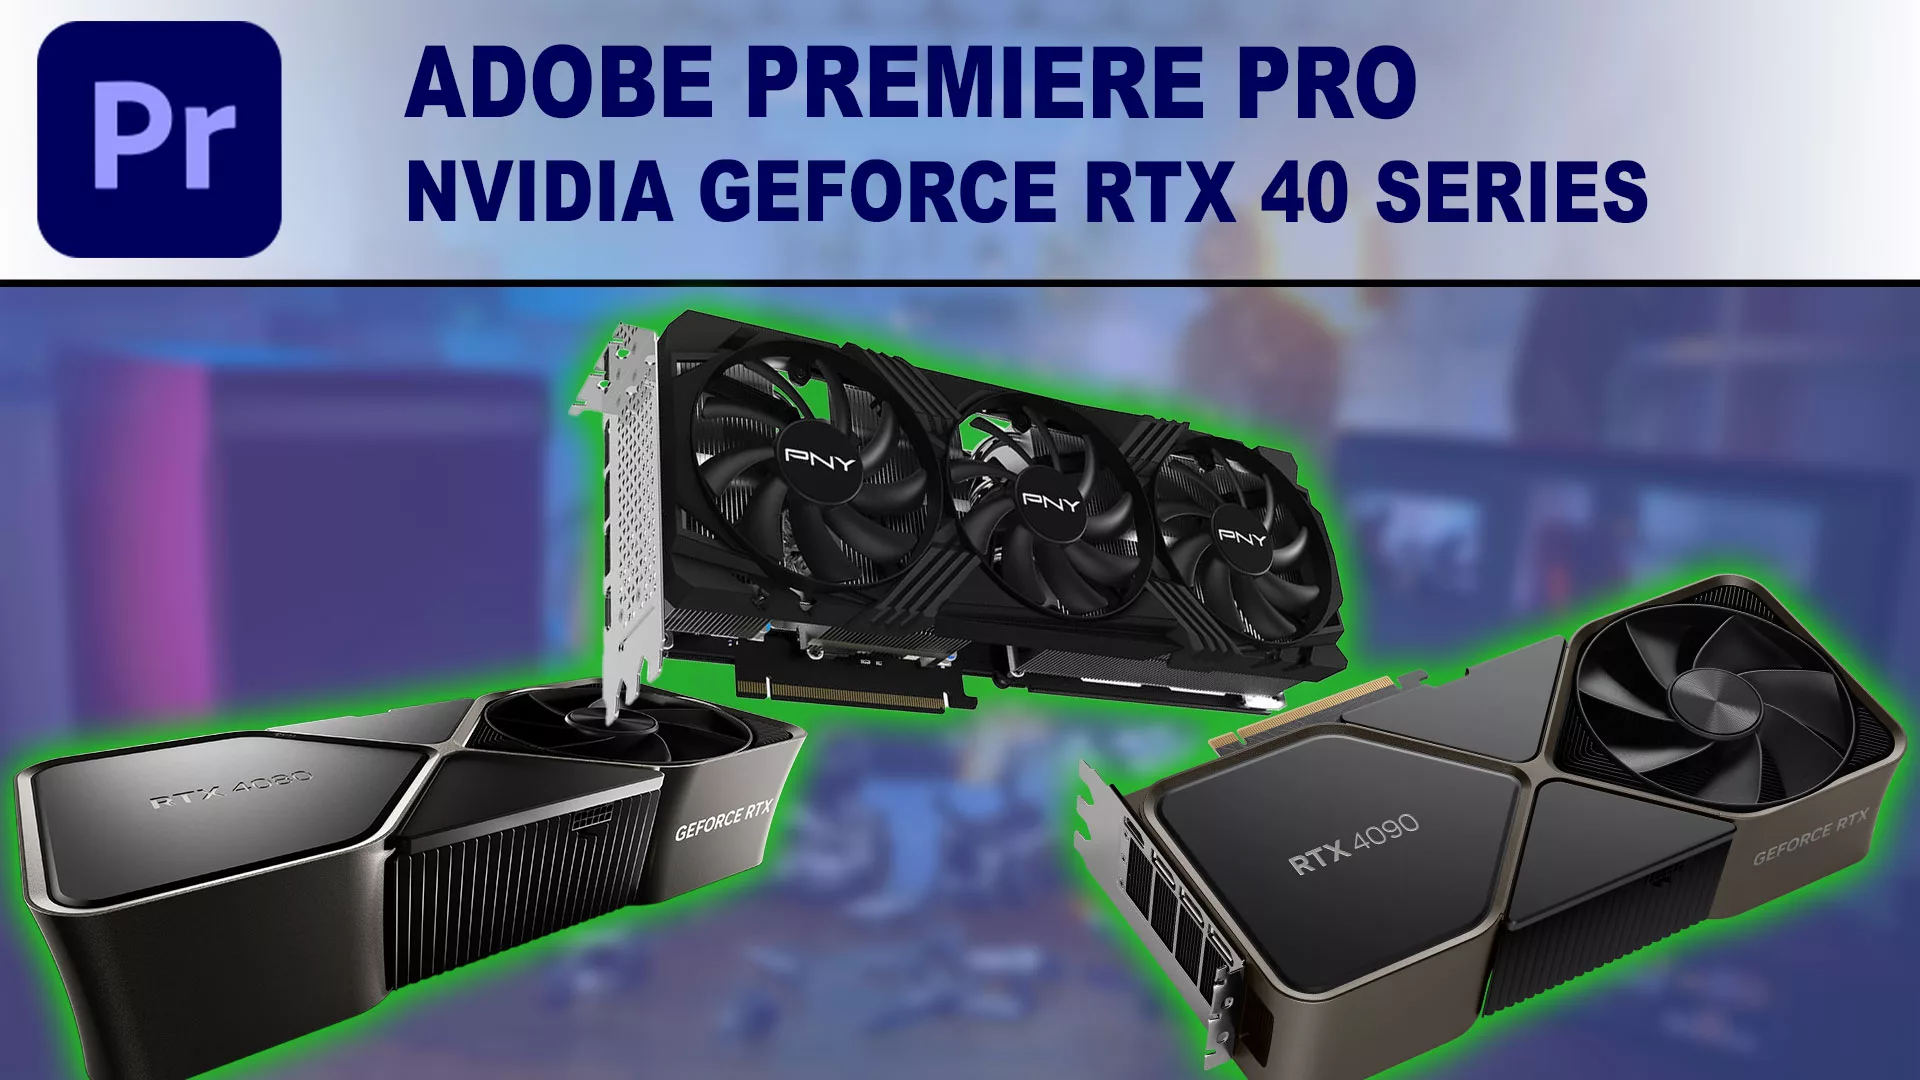 Premiere Pro: NVIDIA GeForce RTX 40 Series Performance Systems